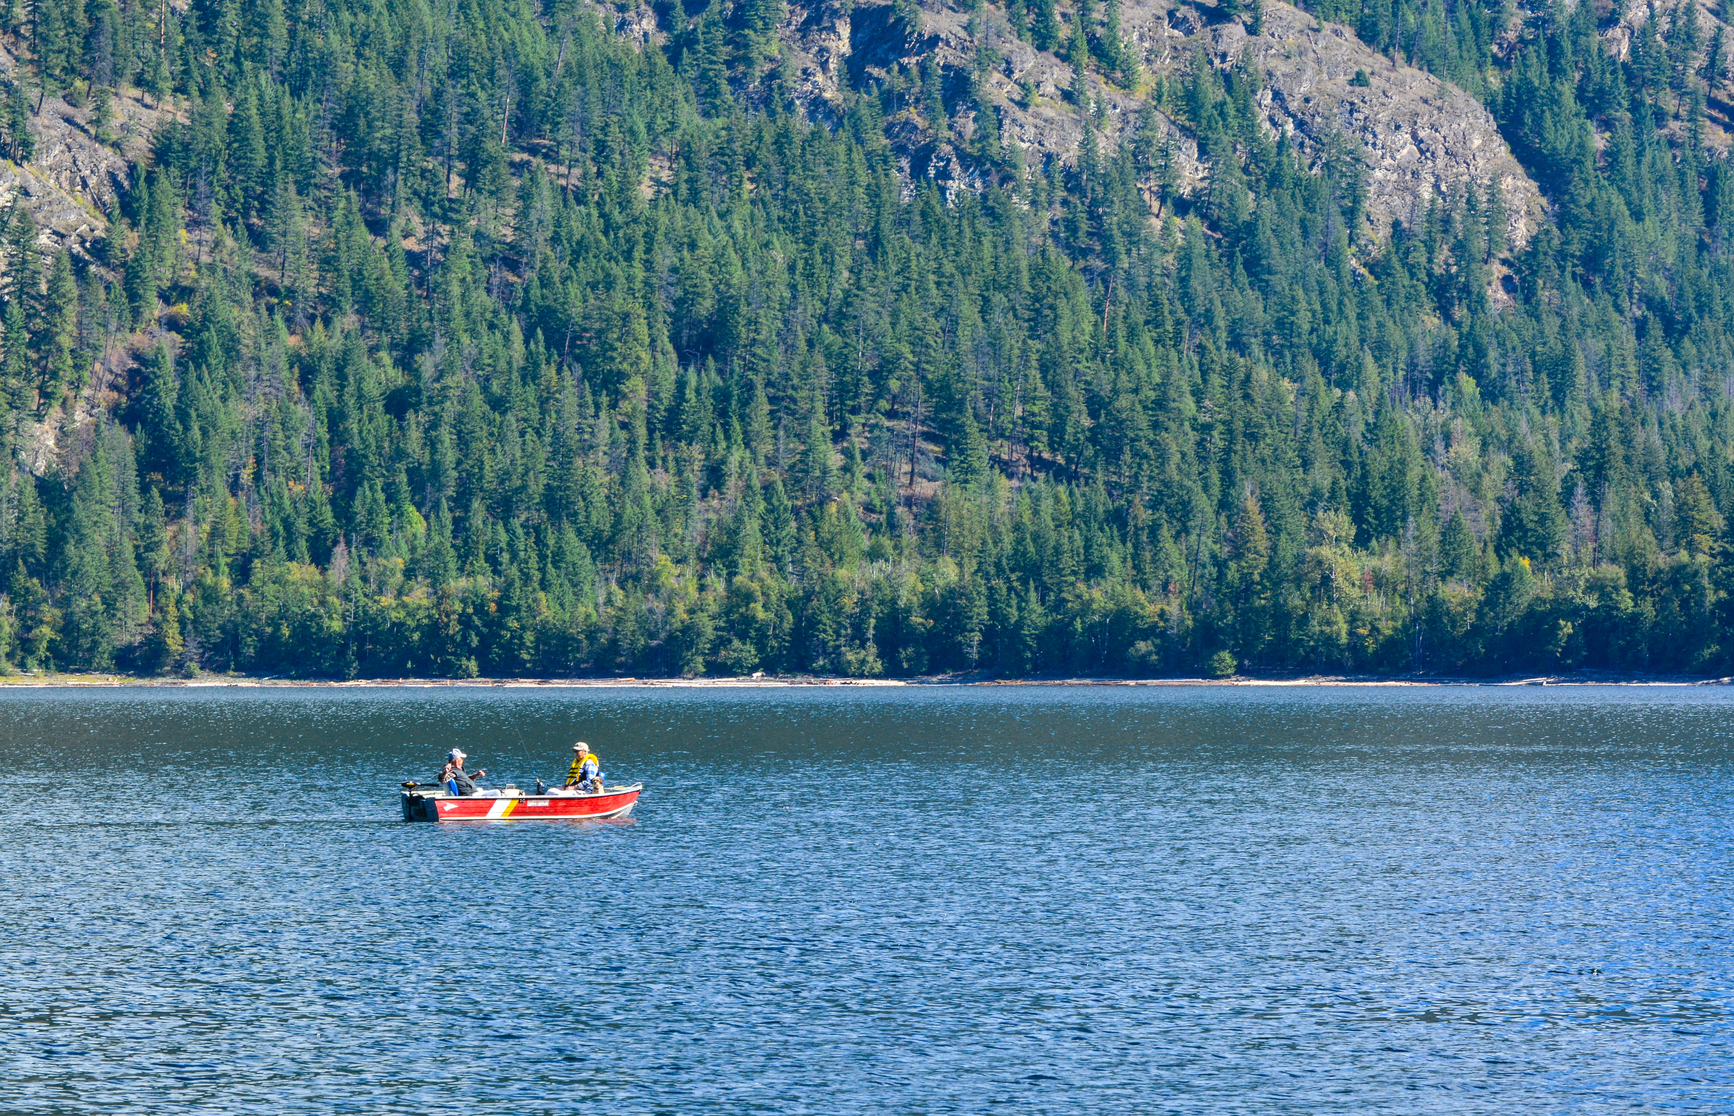 Parks visitors fishing from a boat on Adams Lake Park.